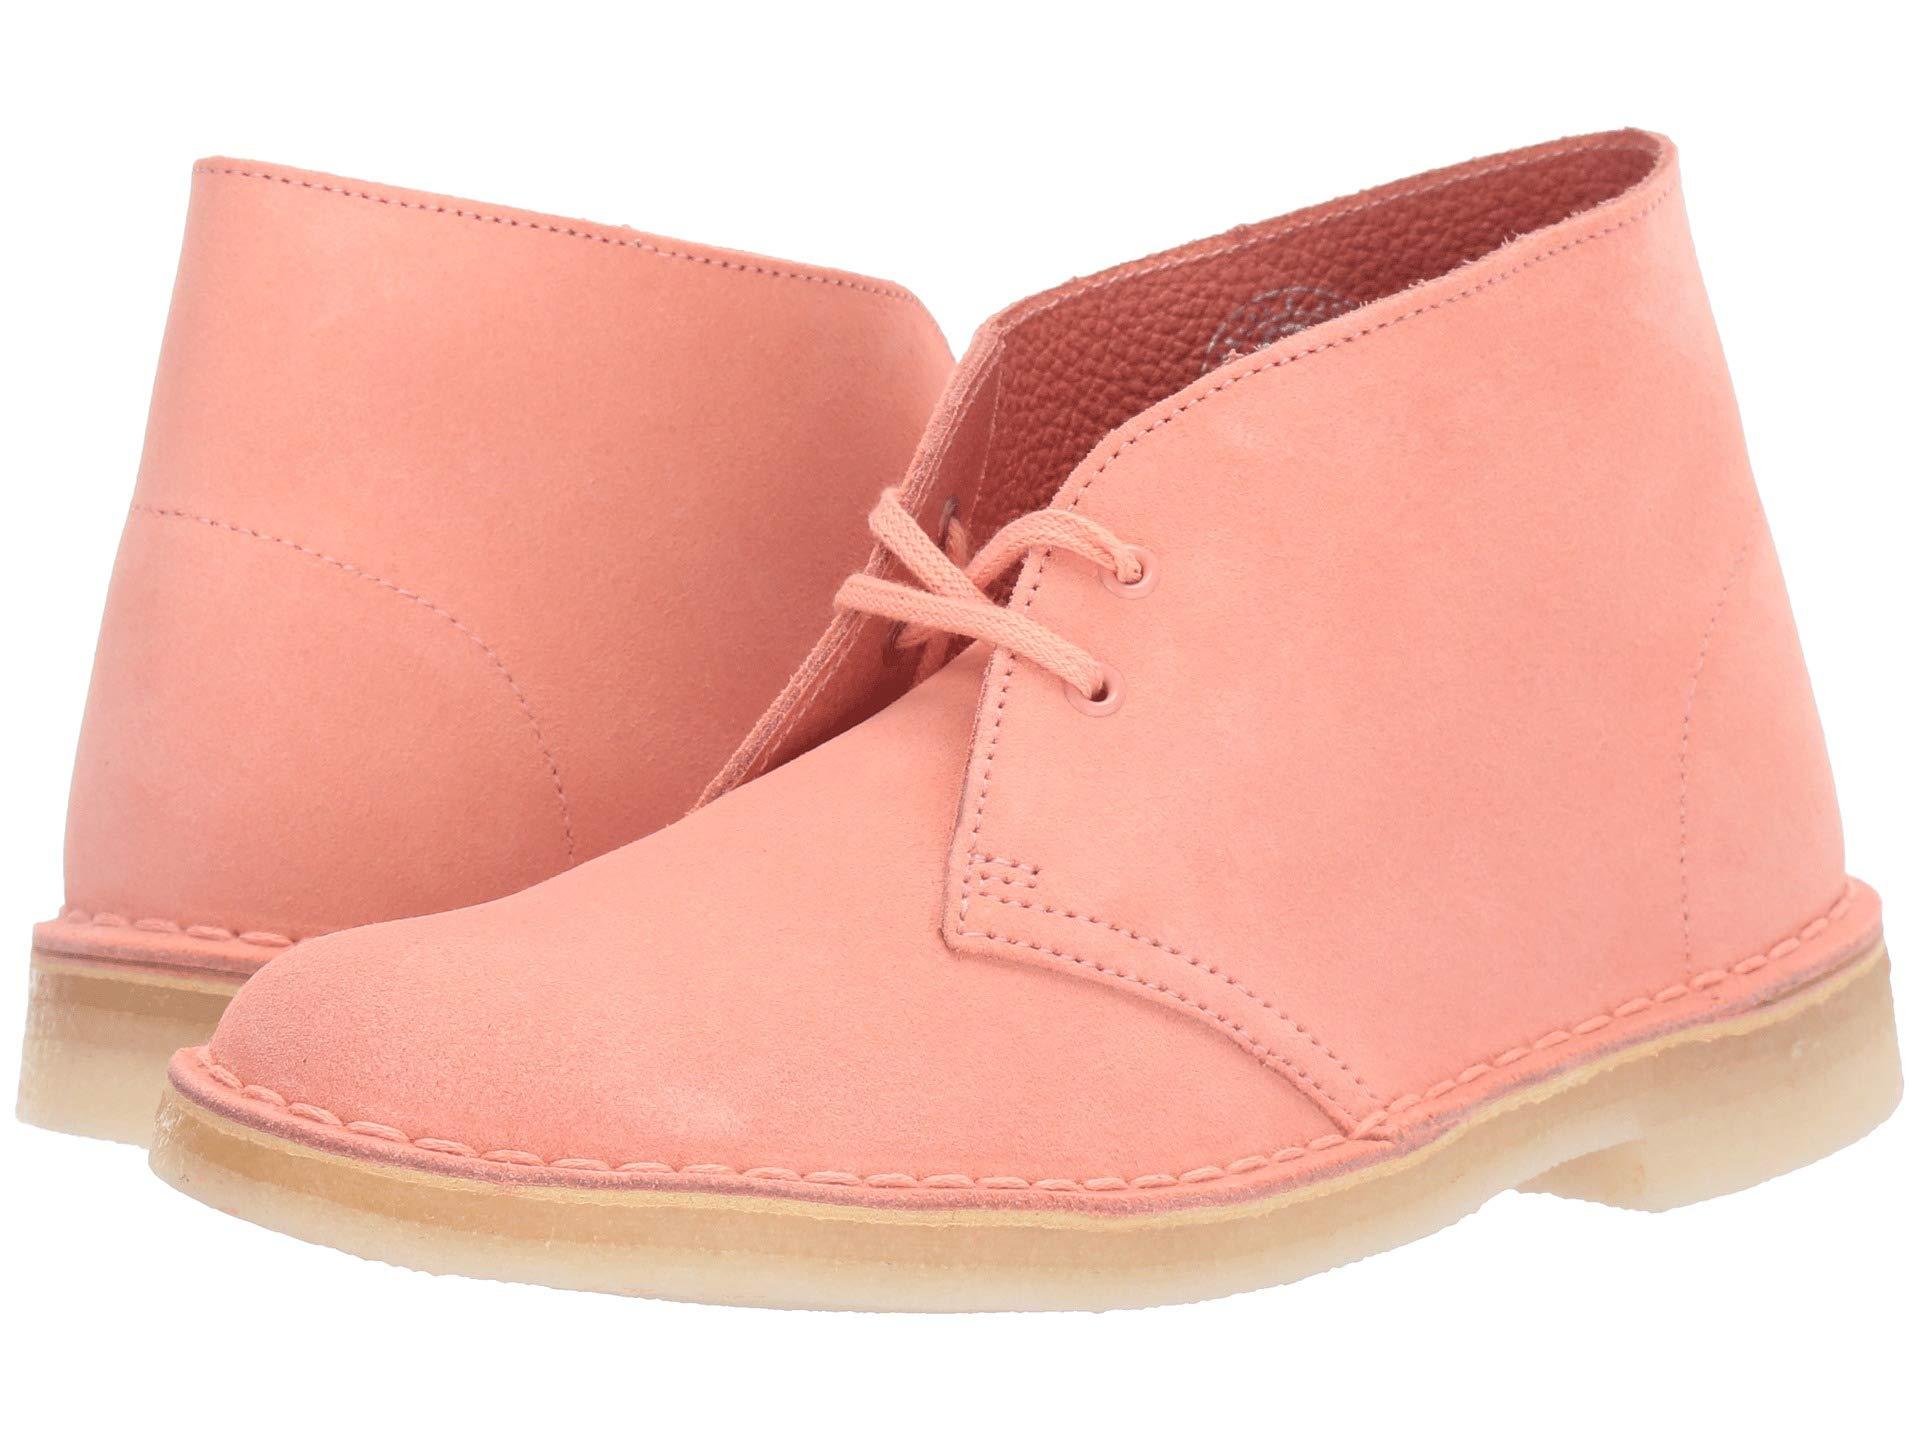 clarks pink shoes